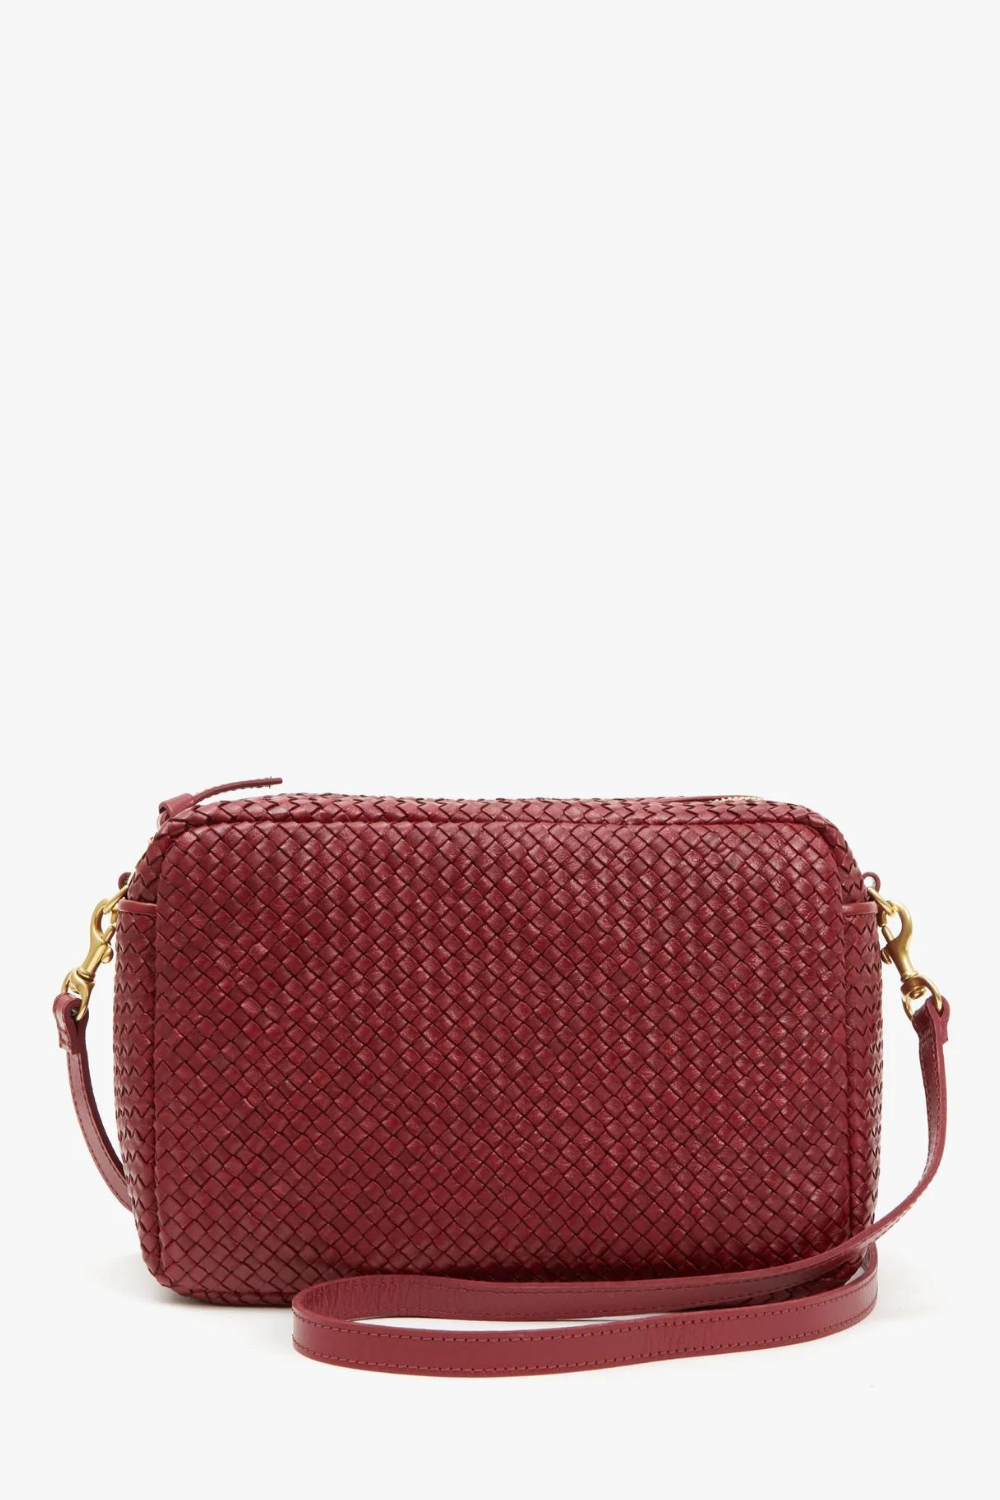 Clare V. Lucie Quilted Checker Crossbody Bag in Poppy/Khaki Quilted Checker